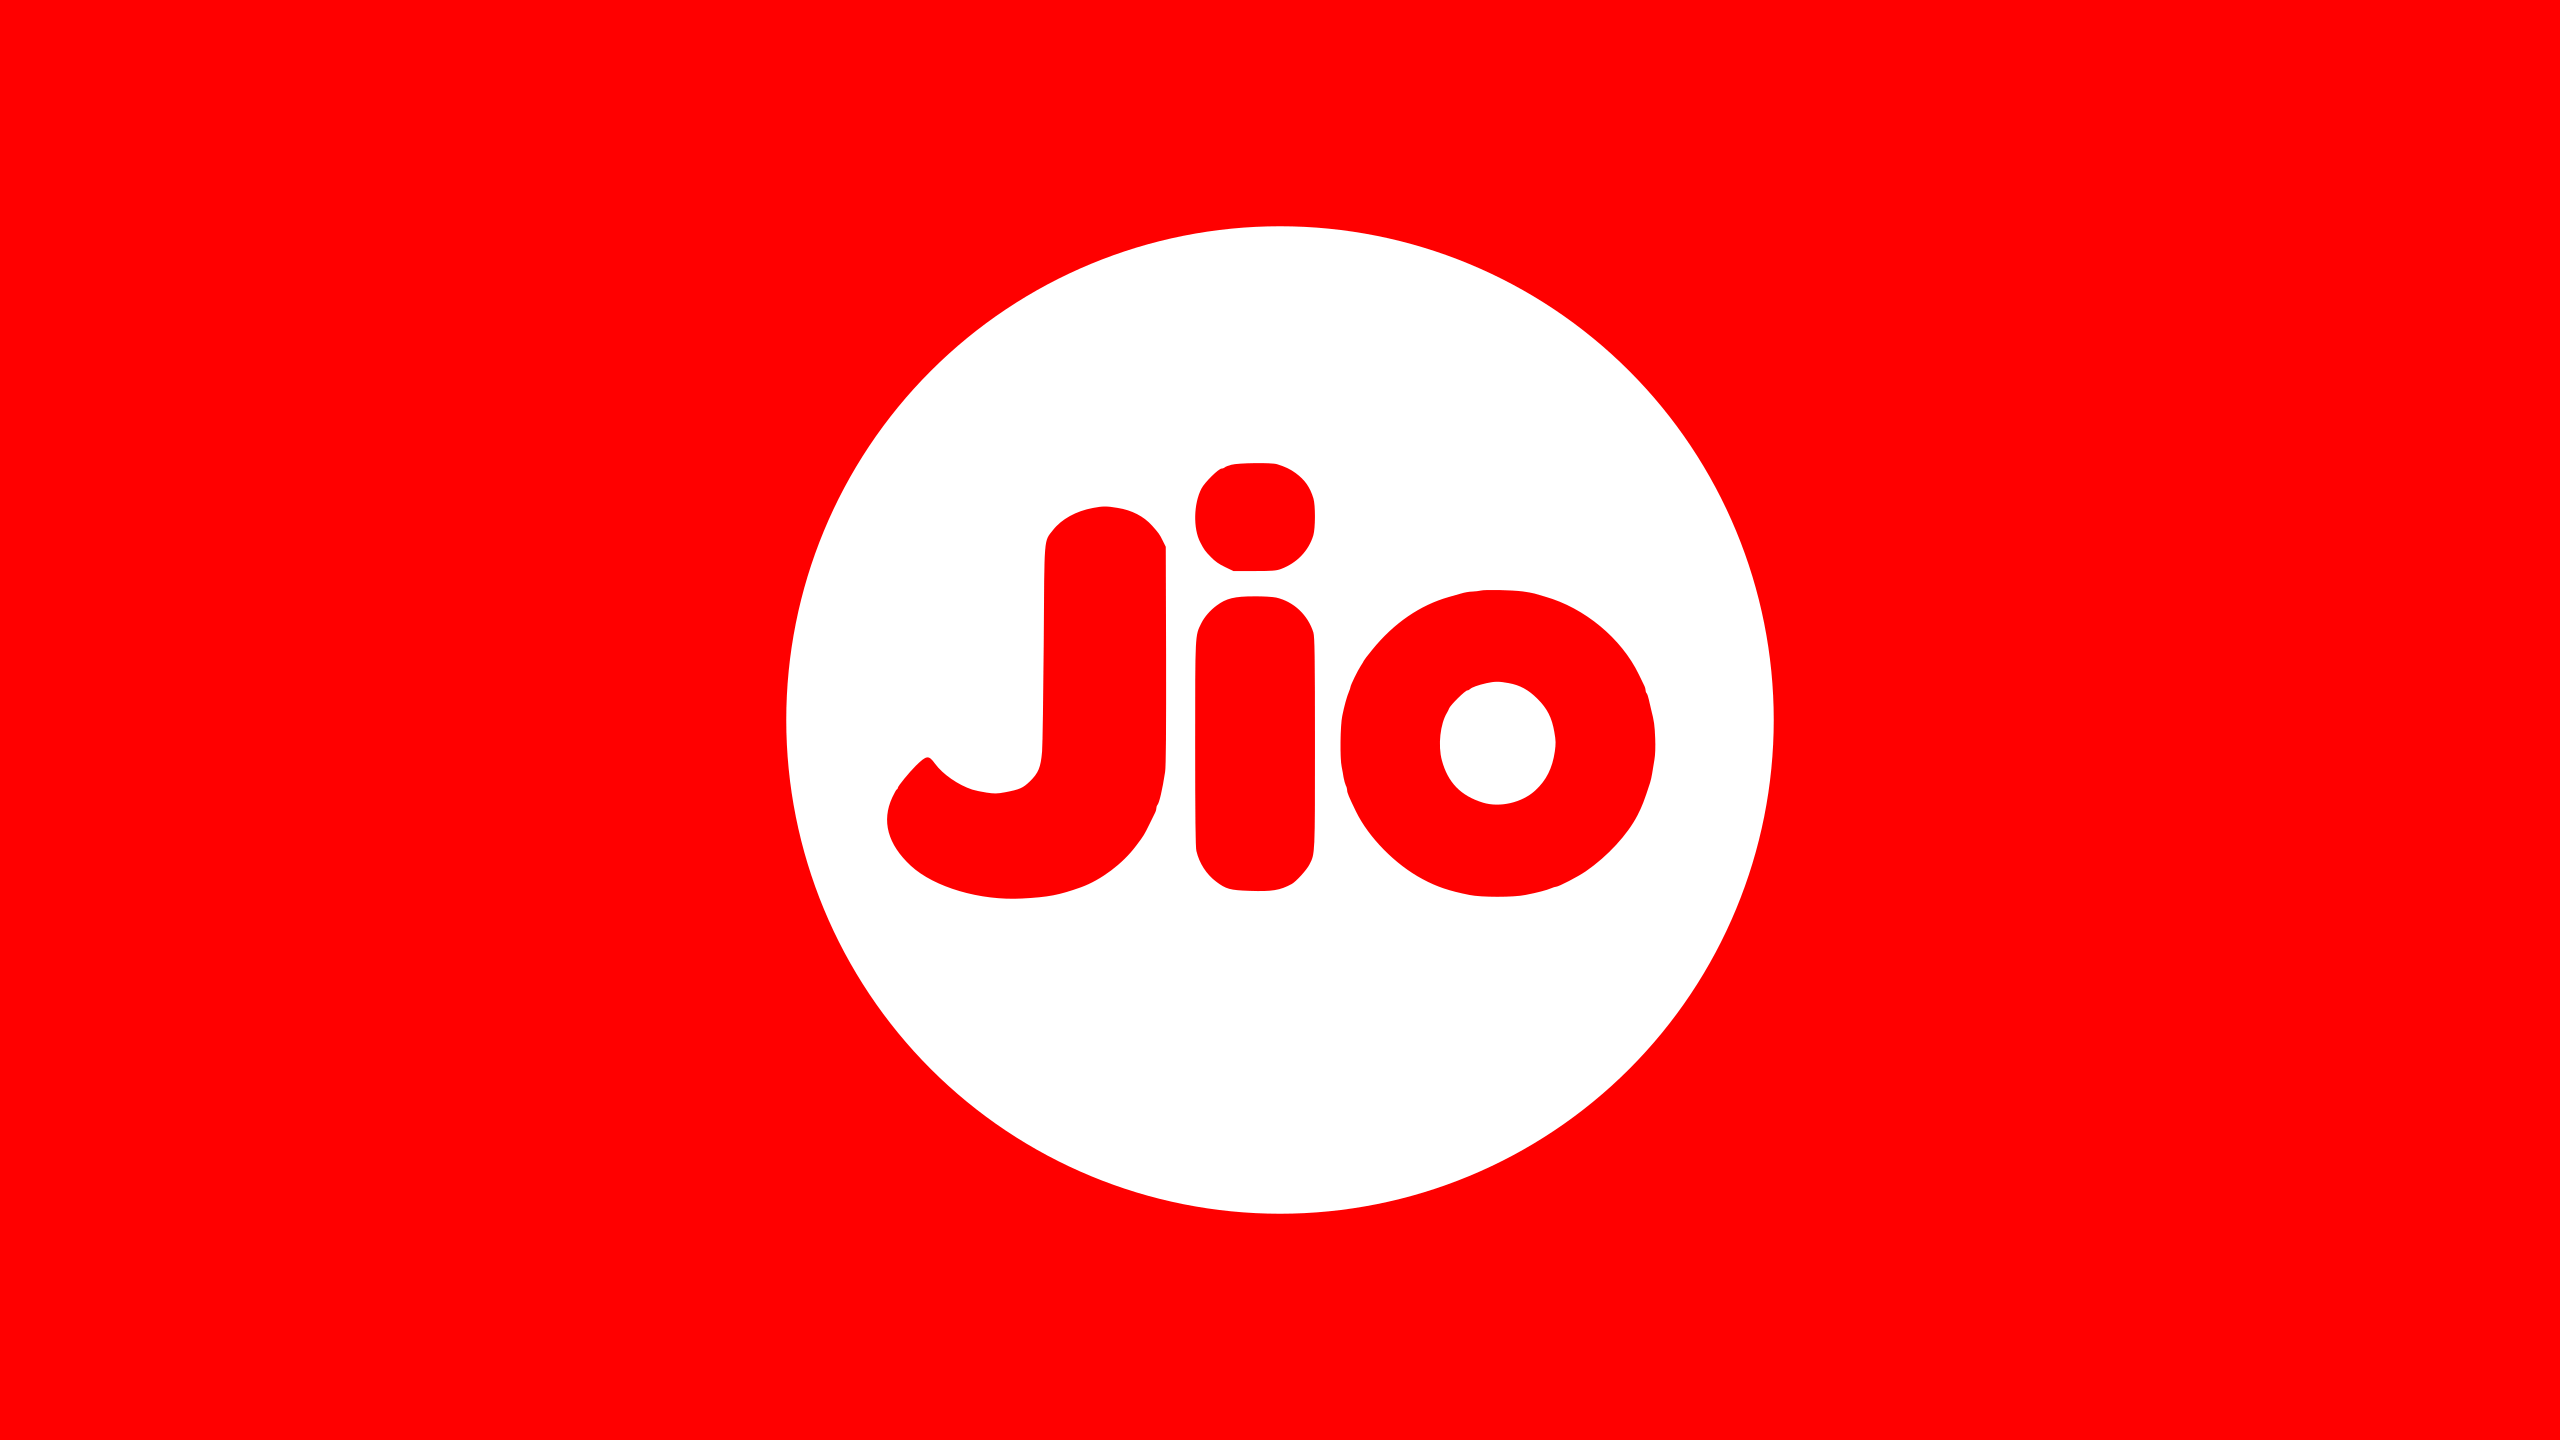 How to cancel a Jio Postpaid connection?